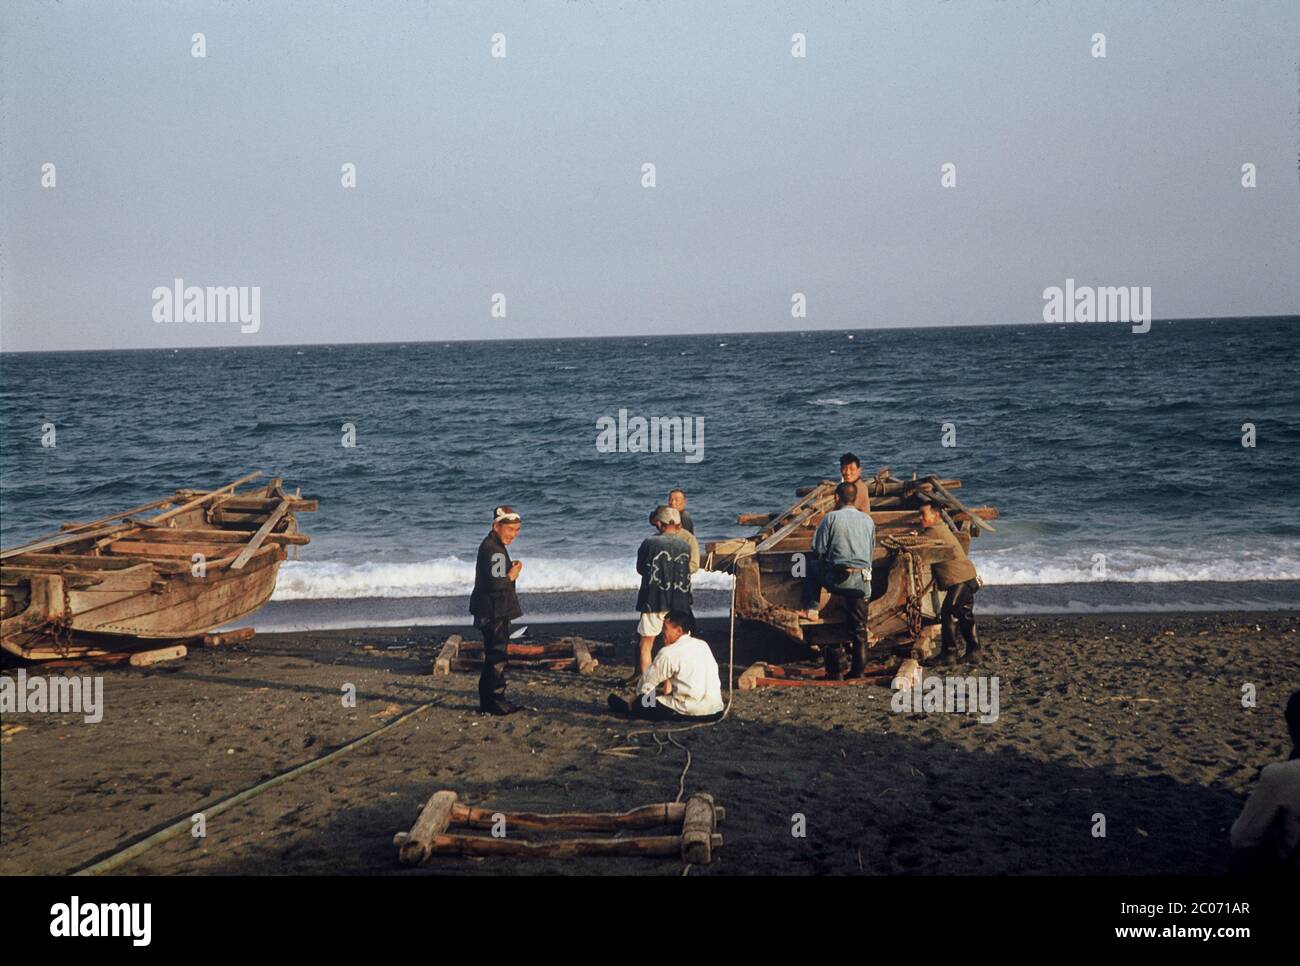 [ 1950s Japan - Fishermen and Fishing Boats ] — Japanese fishermen and their boats on a beach in Odawara, Kanagawa Prefecture in March 1954 (Showa 29).  20th century vintage slide film. Stock Photo